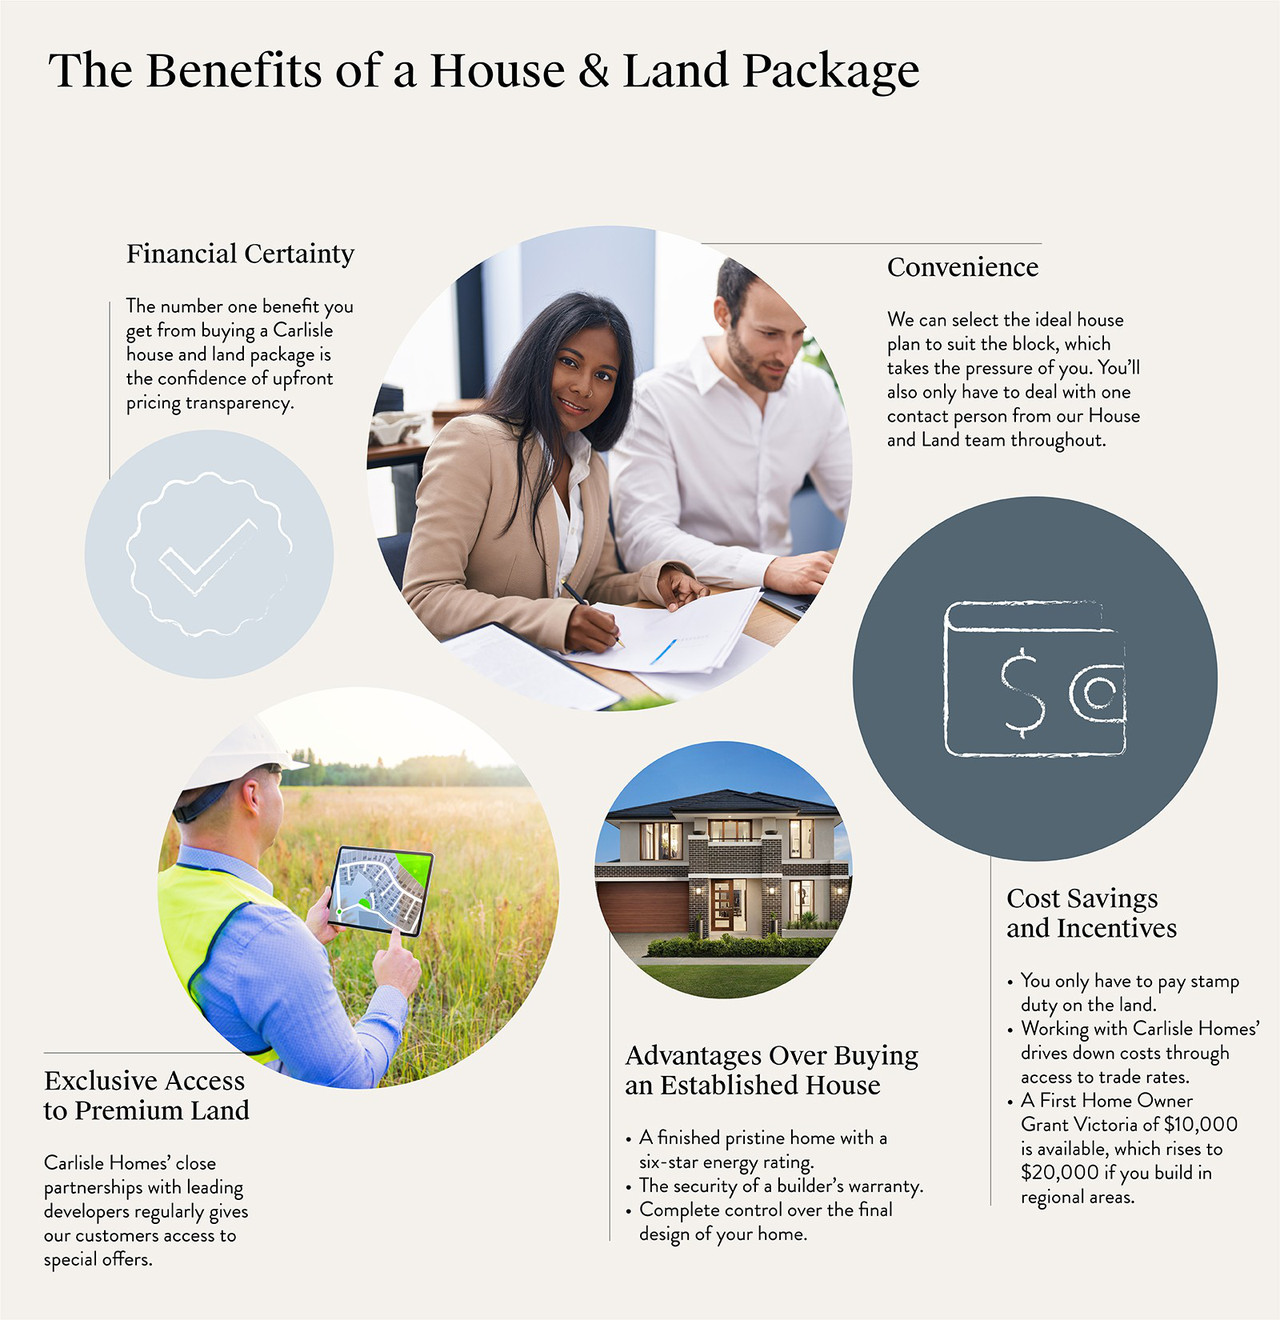 5 Benefits of a House & Land Package